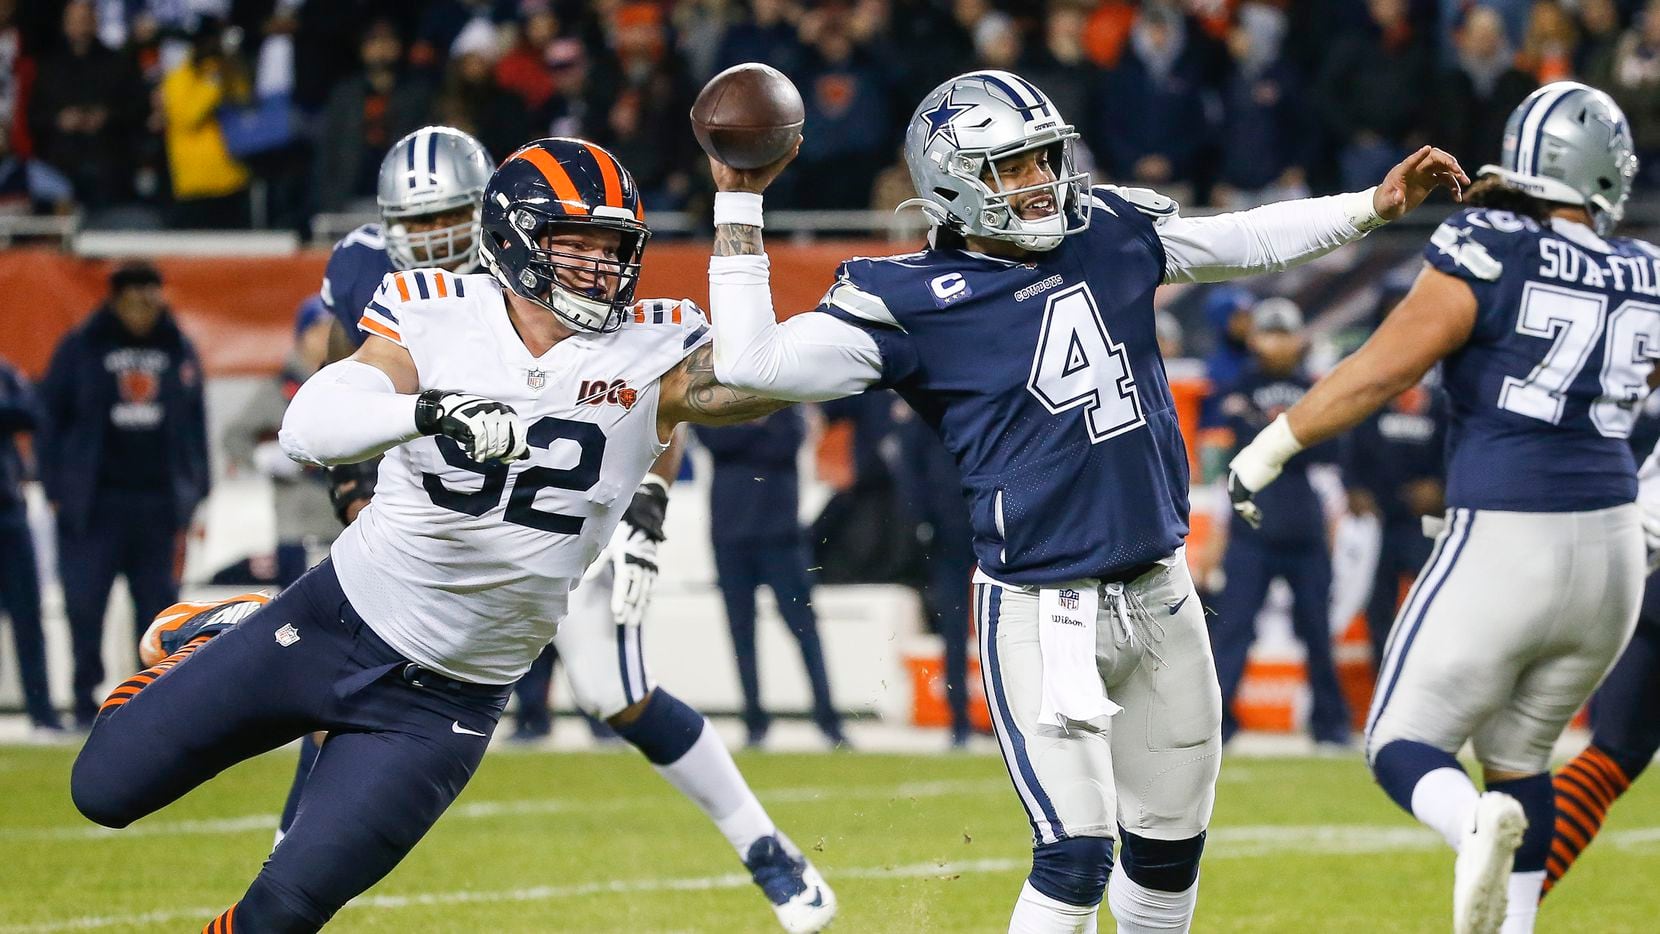 Dallas Cowboys quarterback Dak Prescott (4) fires off a pass before being brought down by Chicago Bears defensive end Brent Urban (92) during the second half a NFL matchup between the Dallas Cowboys and the Chicago Bears on Thursday, Dec. 5, 2019, at Soldier Field in Chicago.